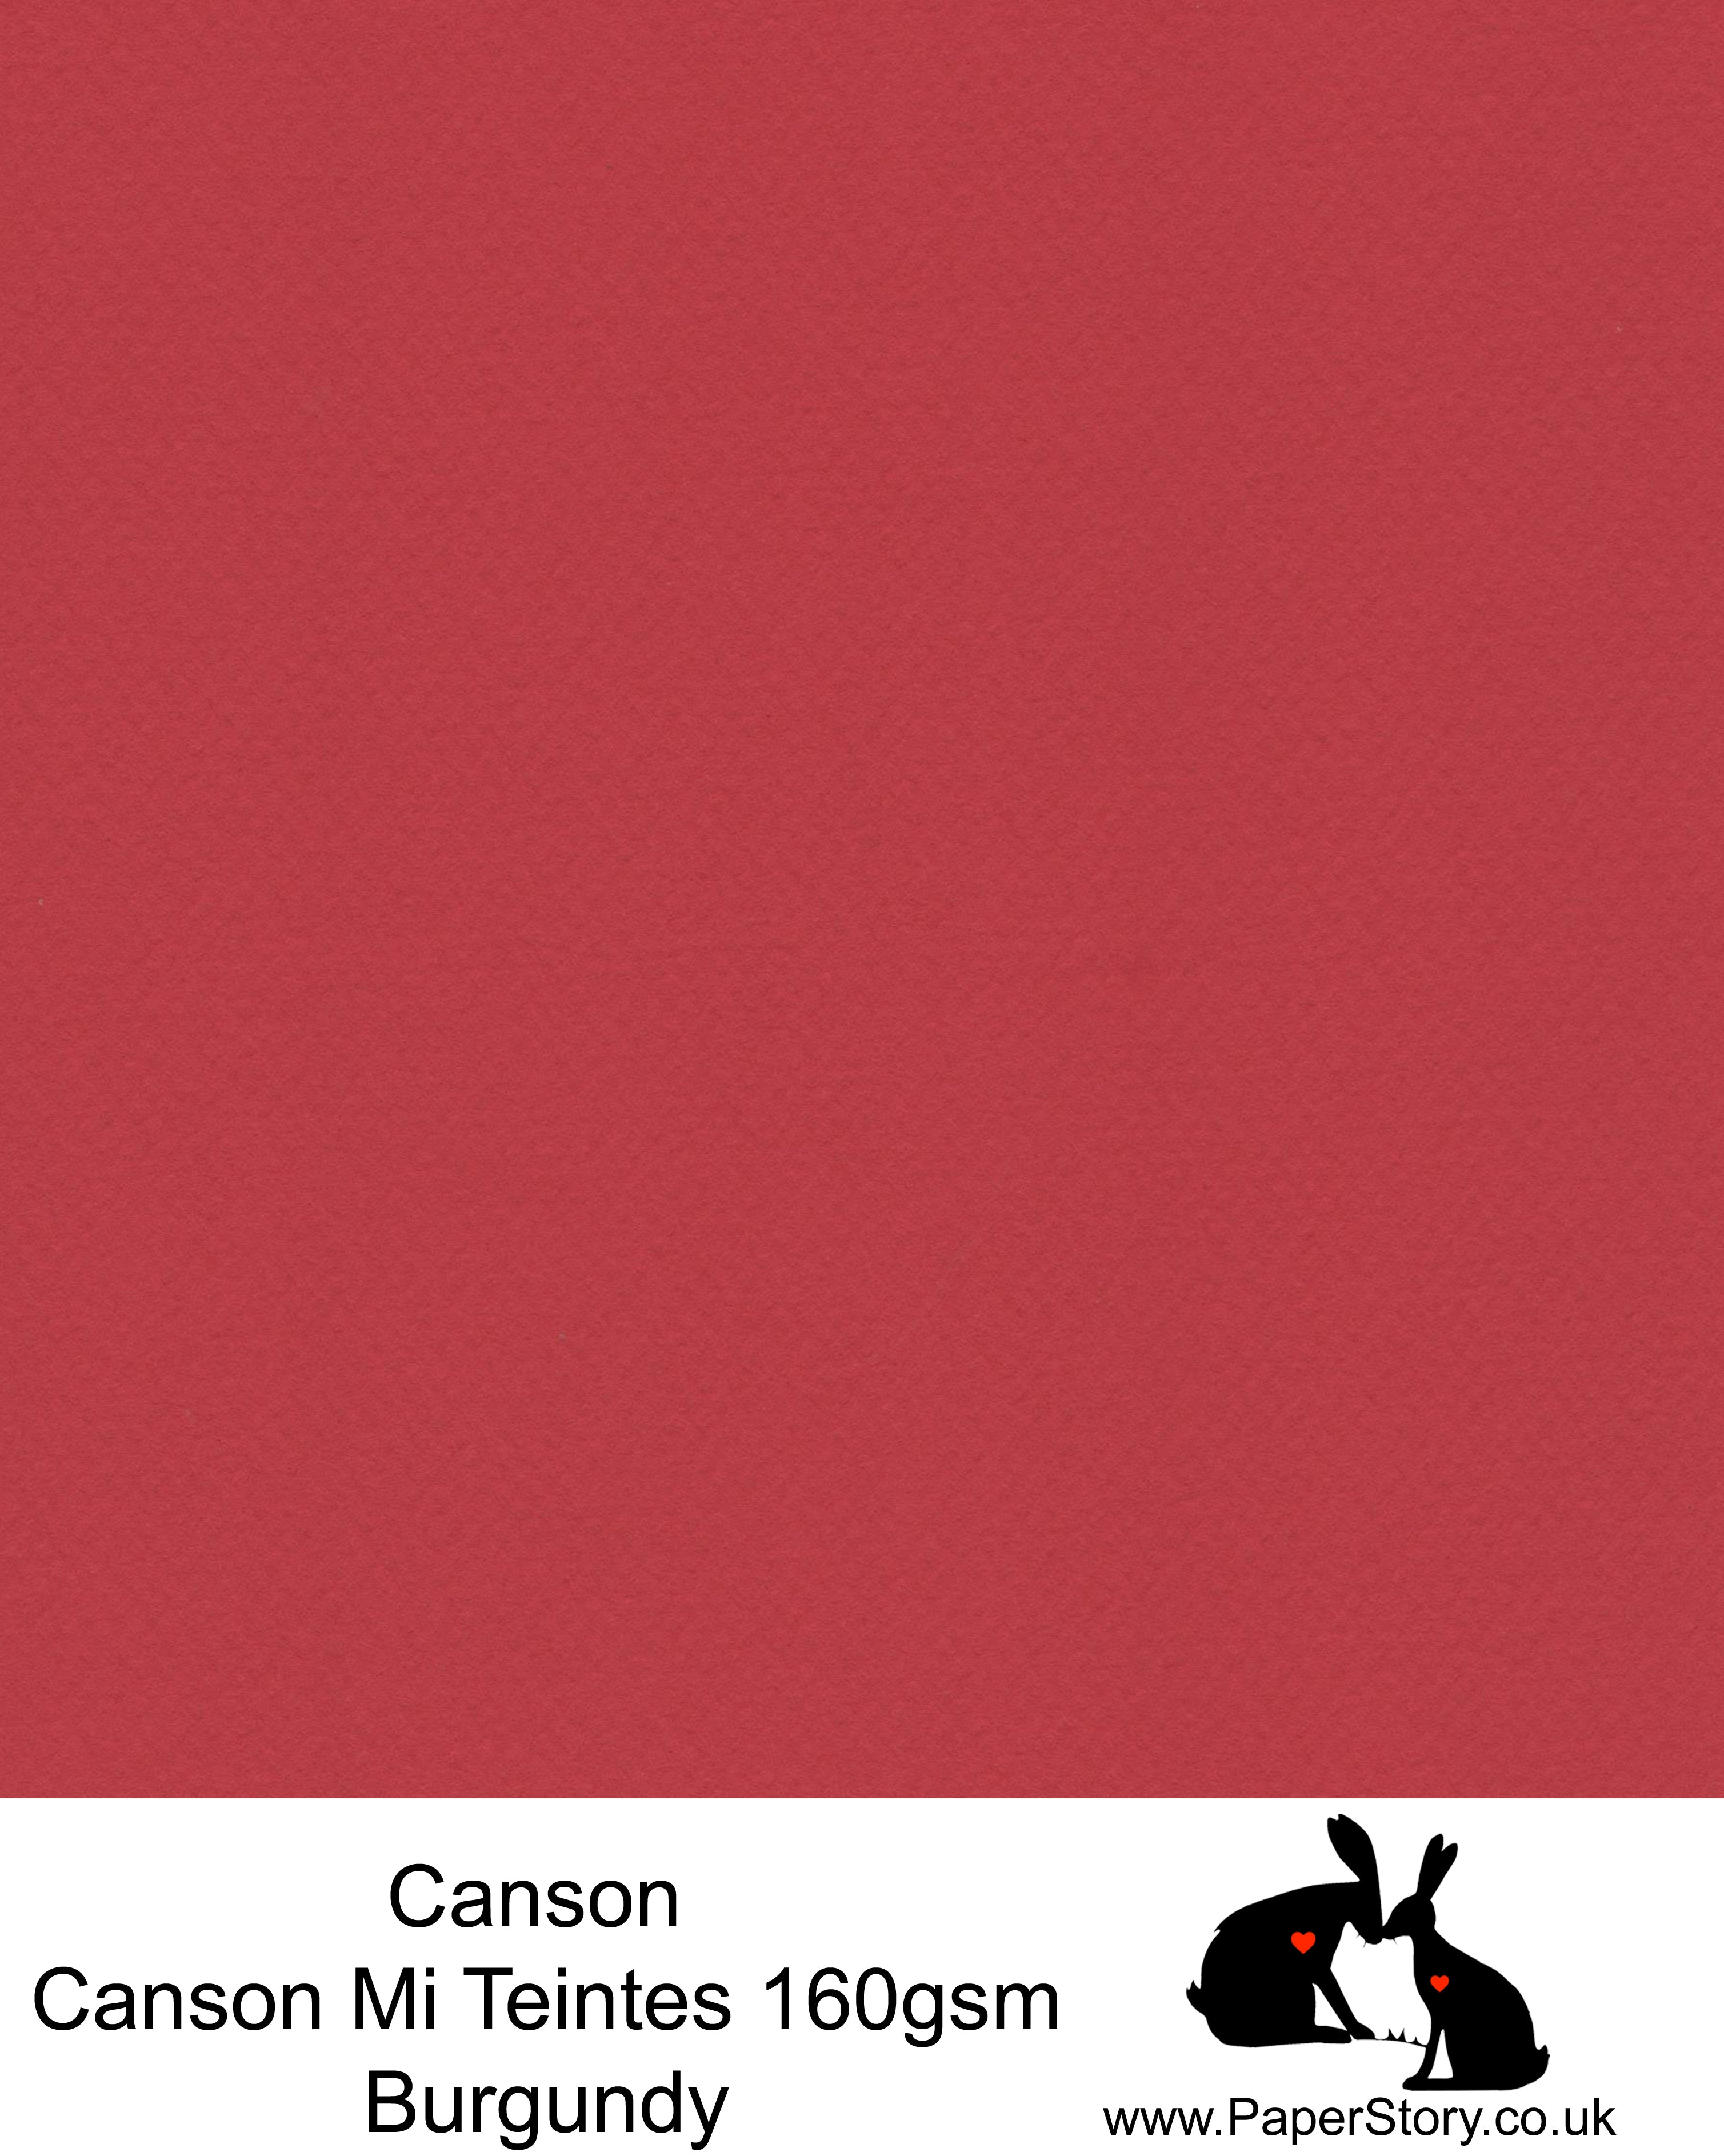 Canson Mi Teintes acid free, Burgundy red, hammered texture honeycomb surface paper 160 gsm. This is a popular and classic paper for all artists especially well respected for Pastel  and Papercutting made famous by Paper Panda. This paper has a honeycombed finish one side and fine grain the other. An authentic art paper, acid free with a  very high 50% cotton content. Canson Mi-Teintes complies with the ISO 9706 standard on permanence, a guarantee of excellent conservation  